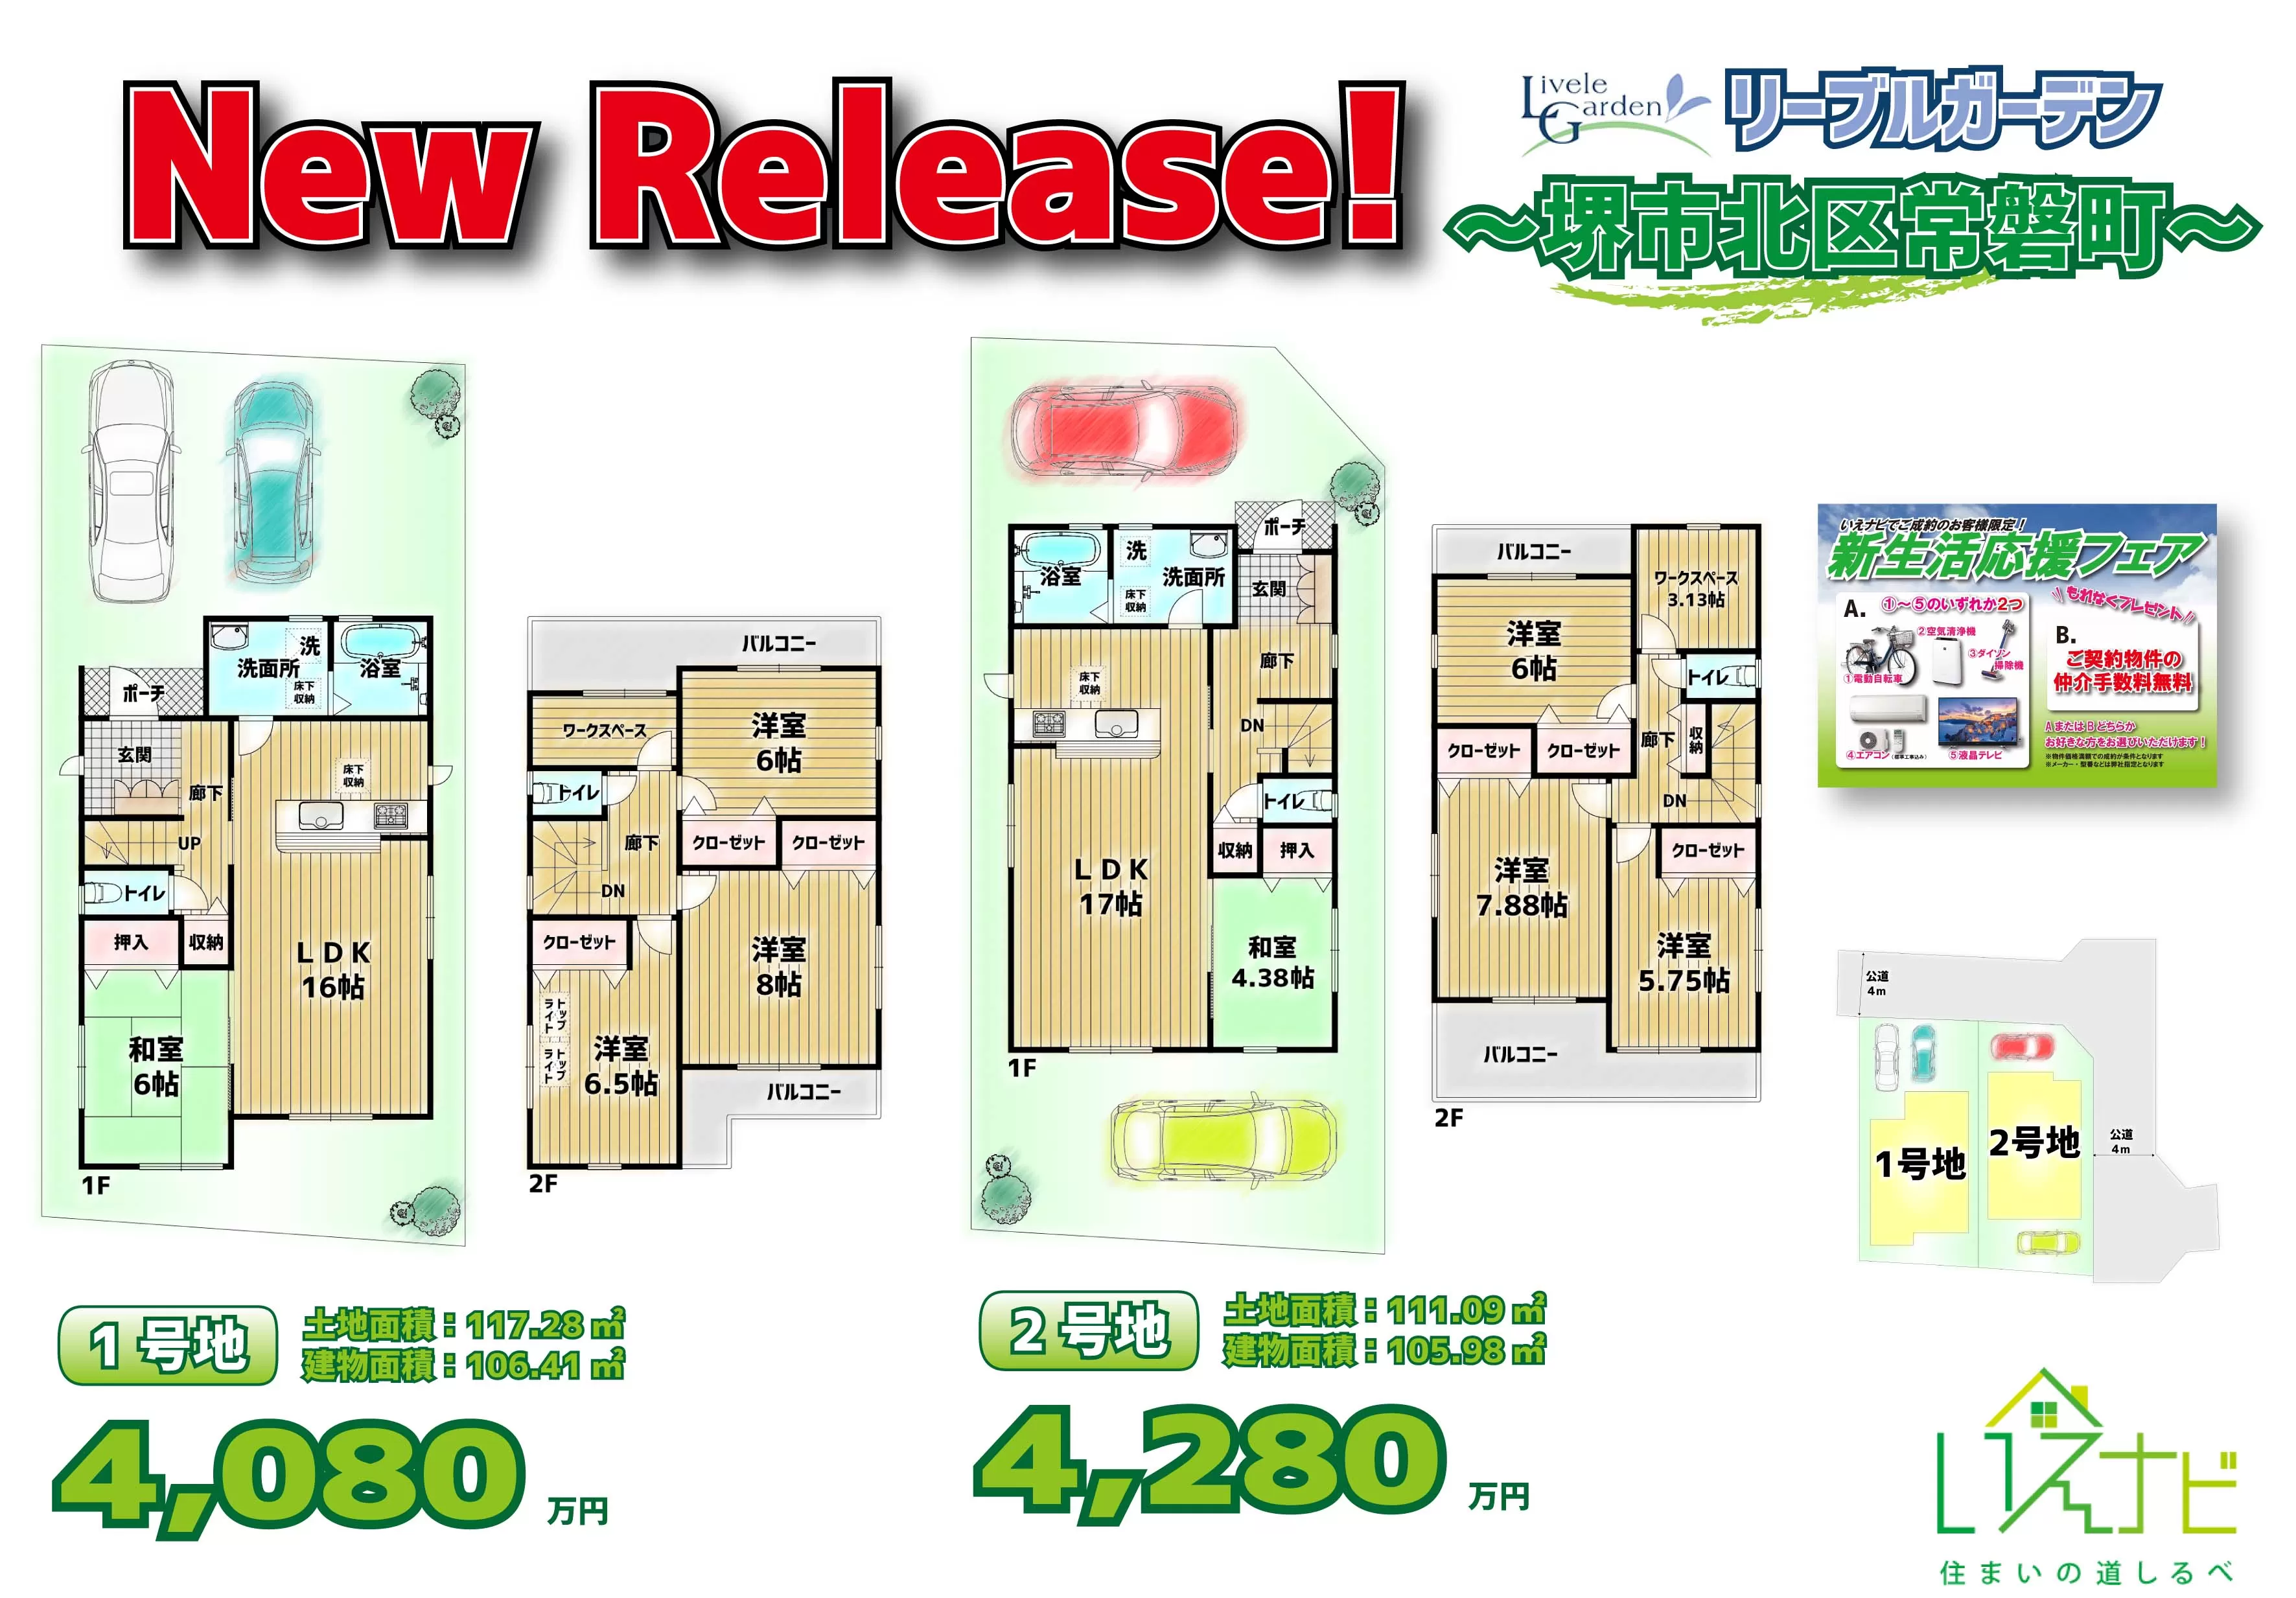 New Release ～リーブルガーデン堺市北区常磐町～